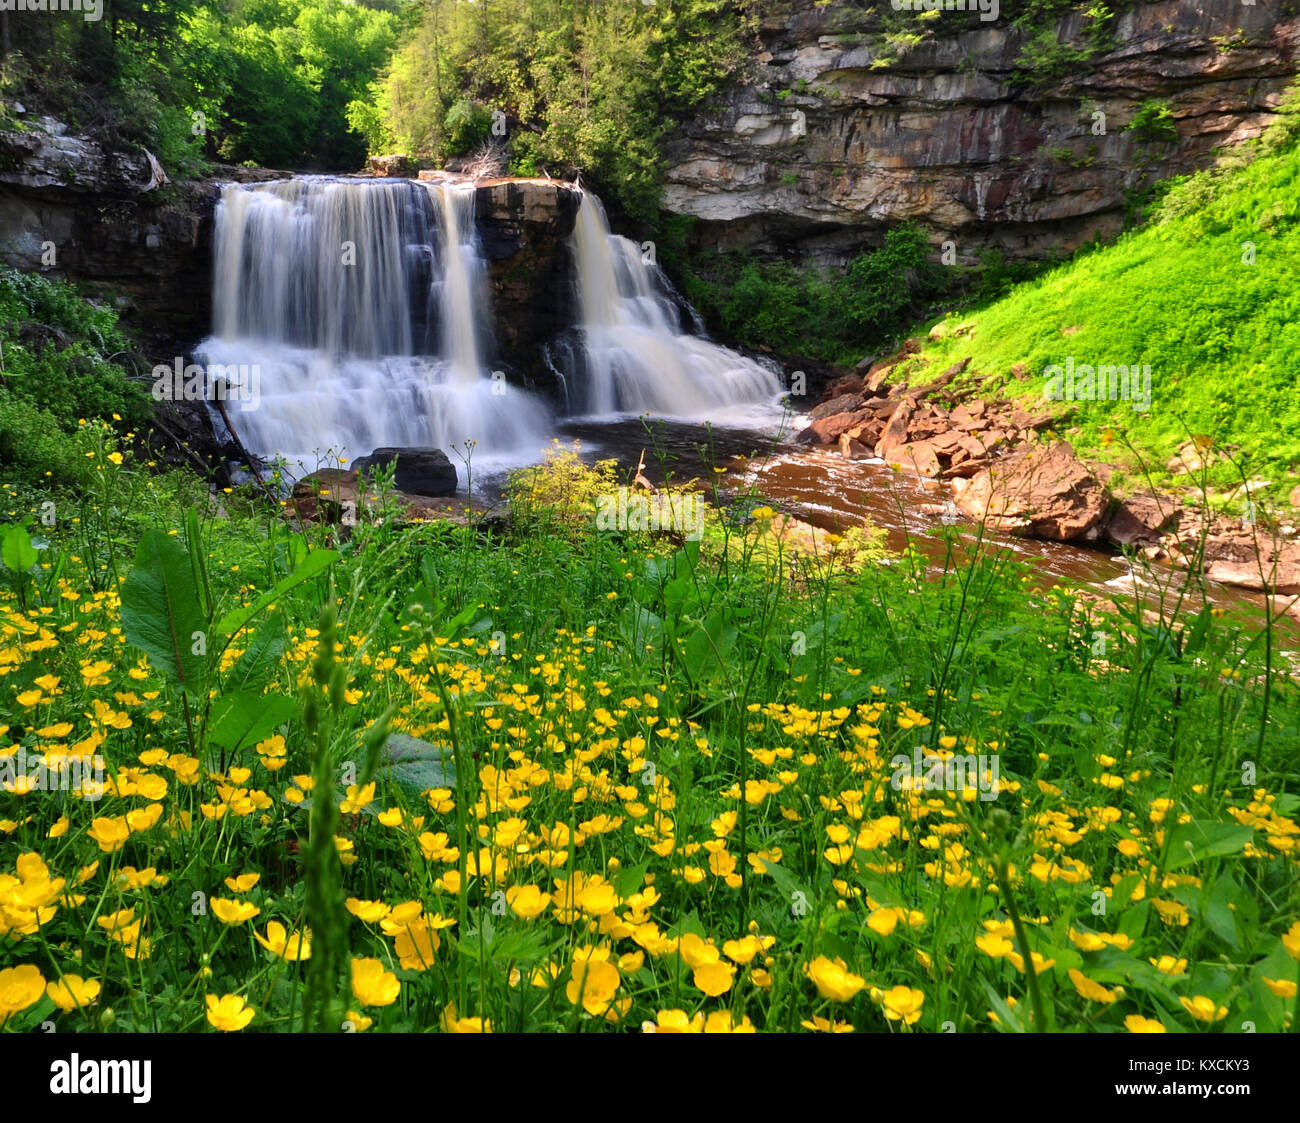 Iconic Blackwater Falls with summertime flowers, West Virginia Stock Photo